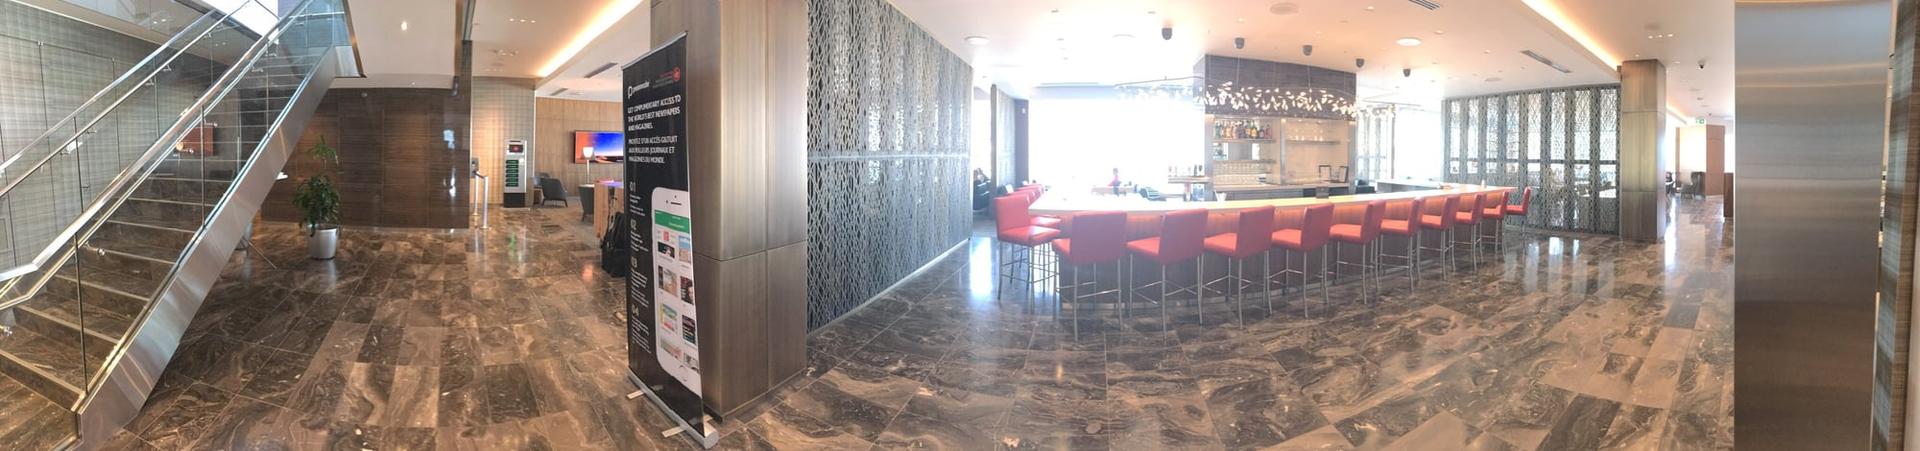 Air Canada Maple Leaf Lounge image 9 of 12